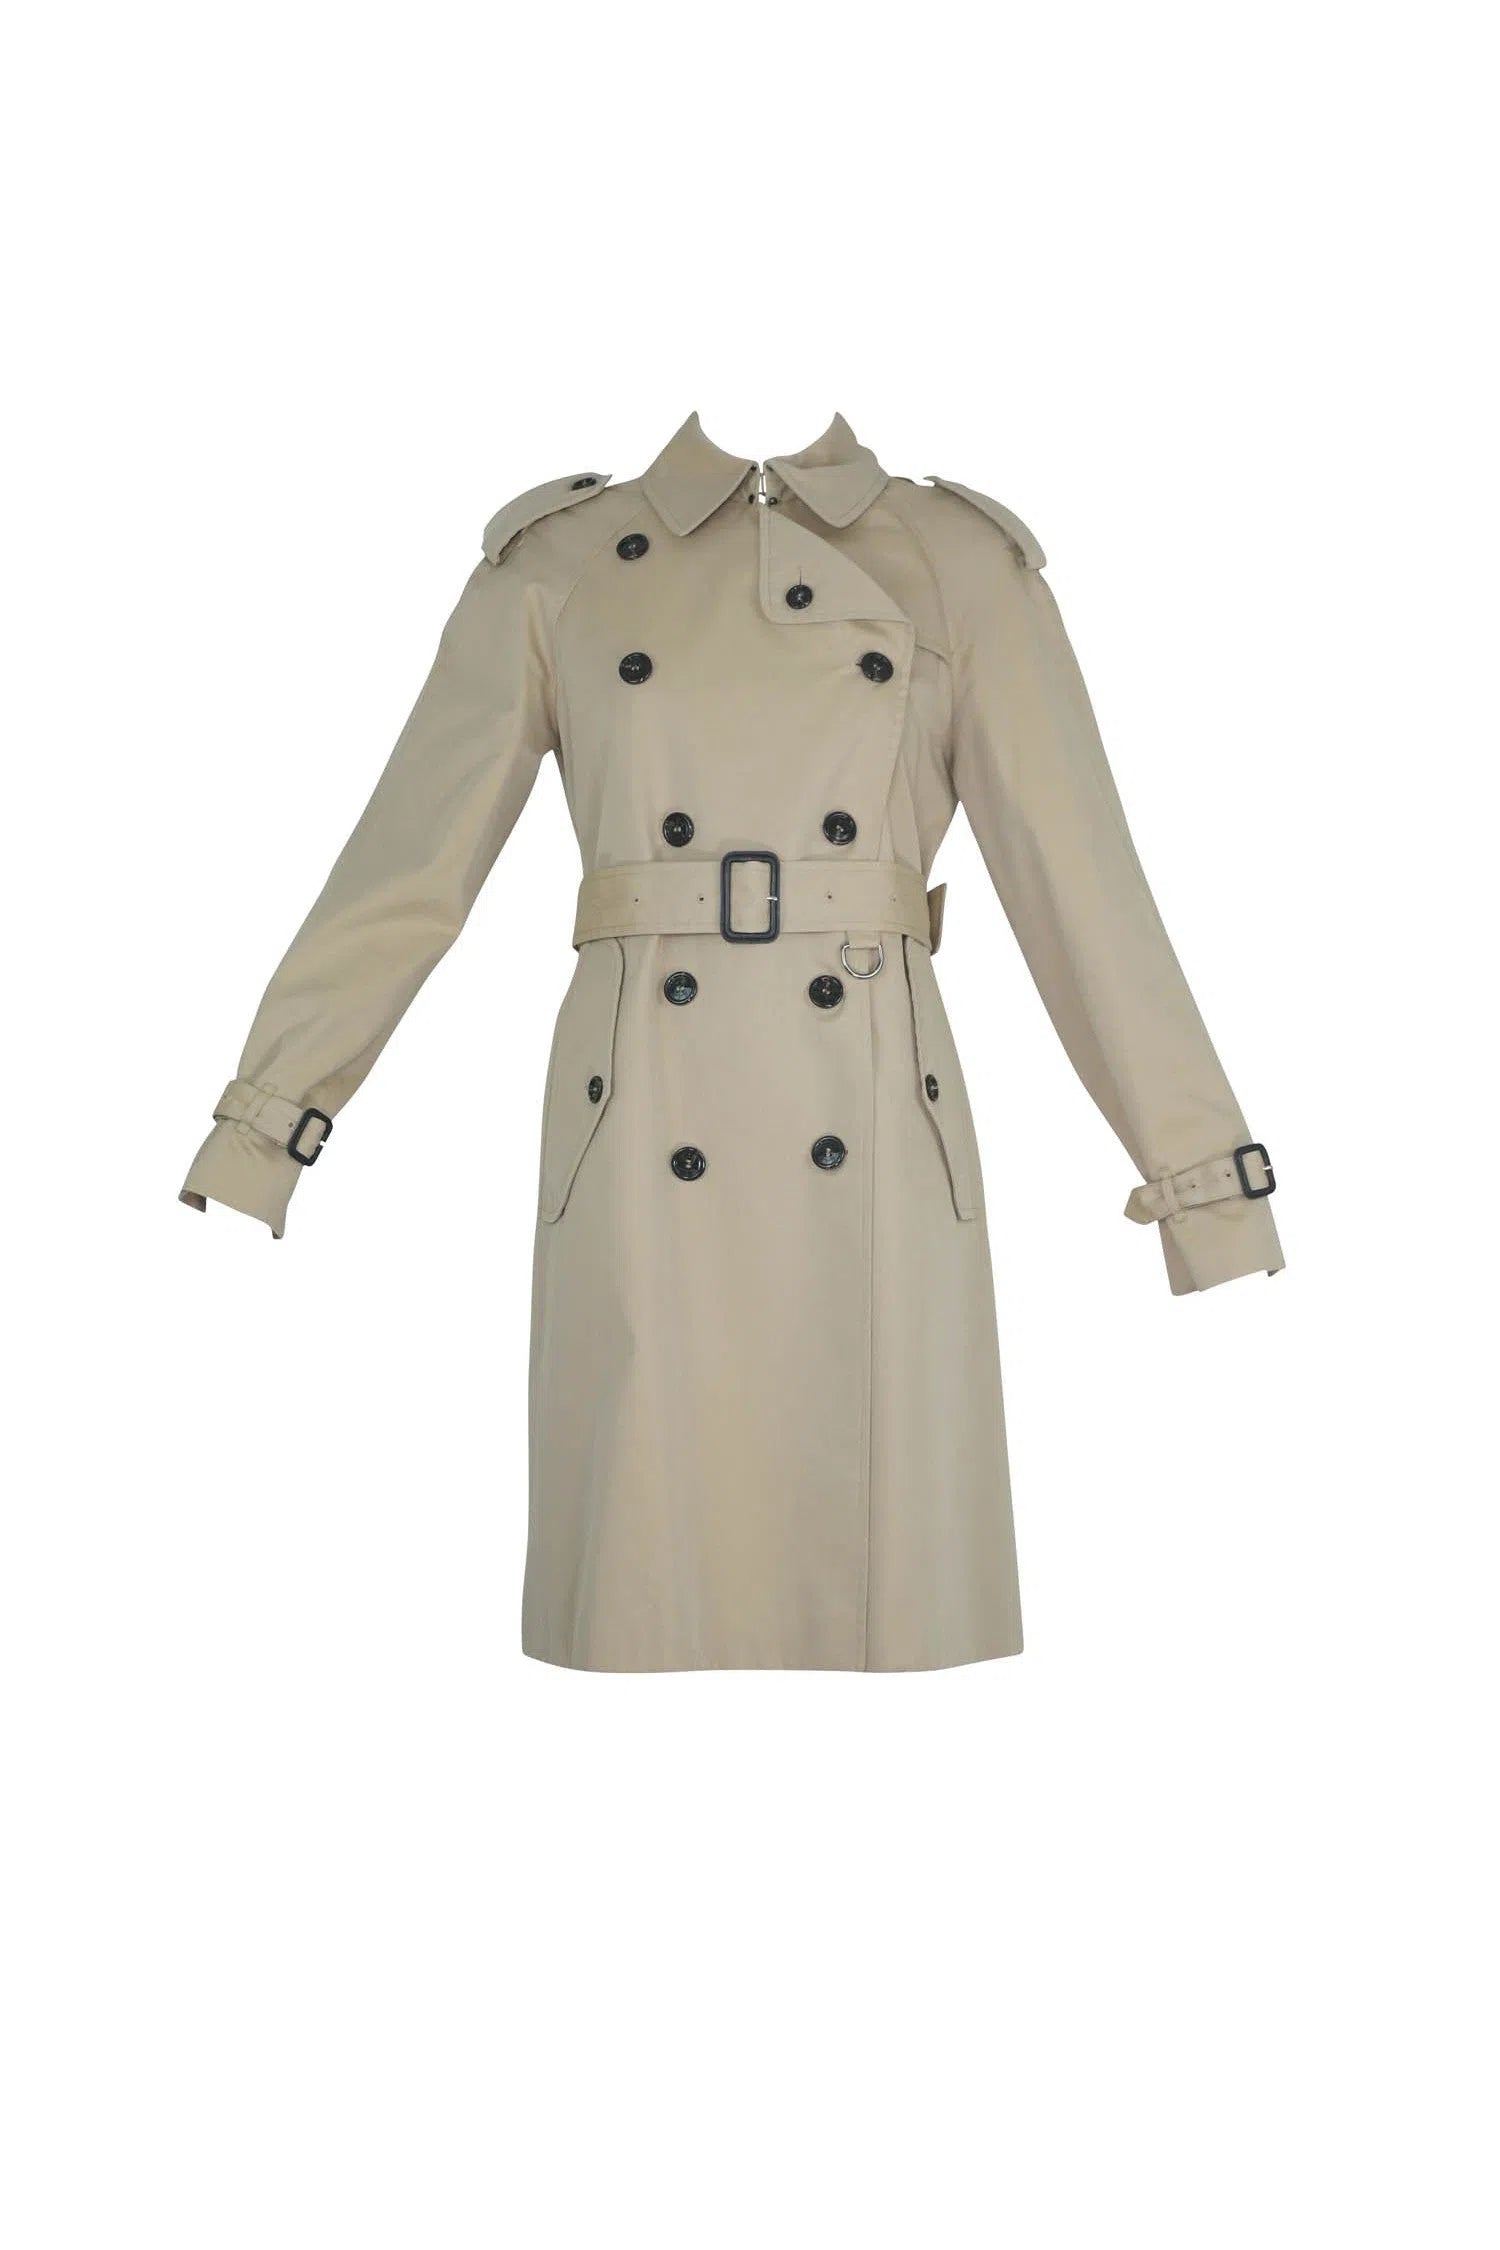 Burberry London Classic Belted Trench Coat Size 6 - Foxy Couture Carmel